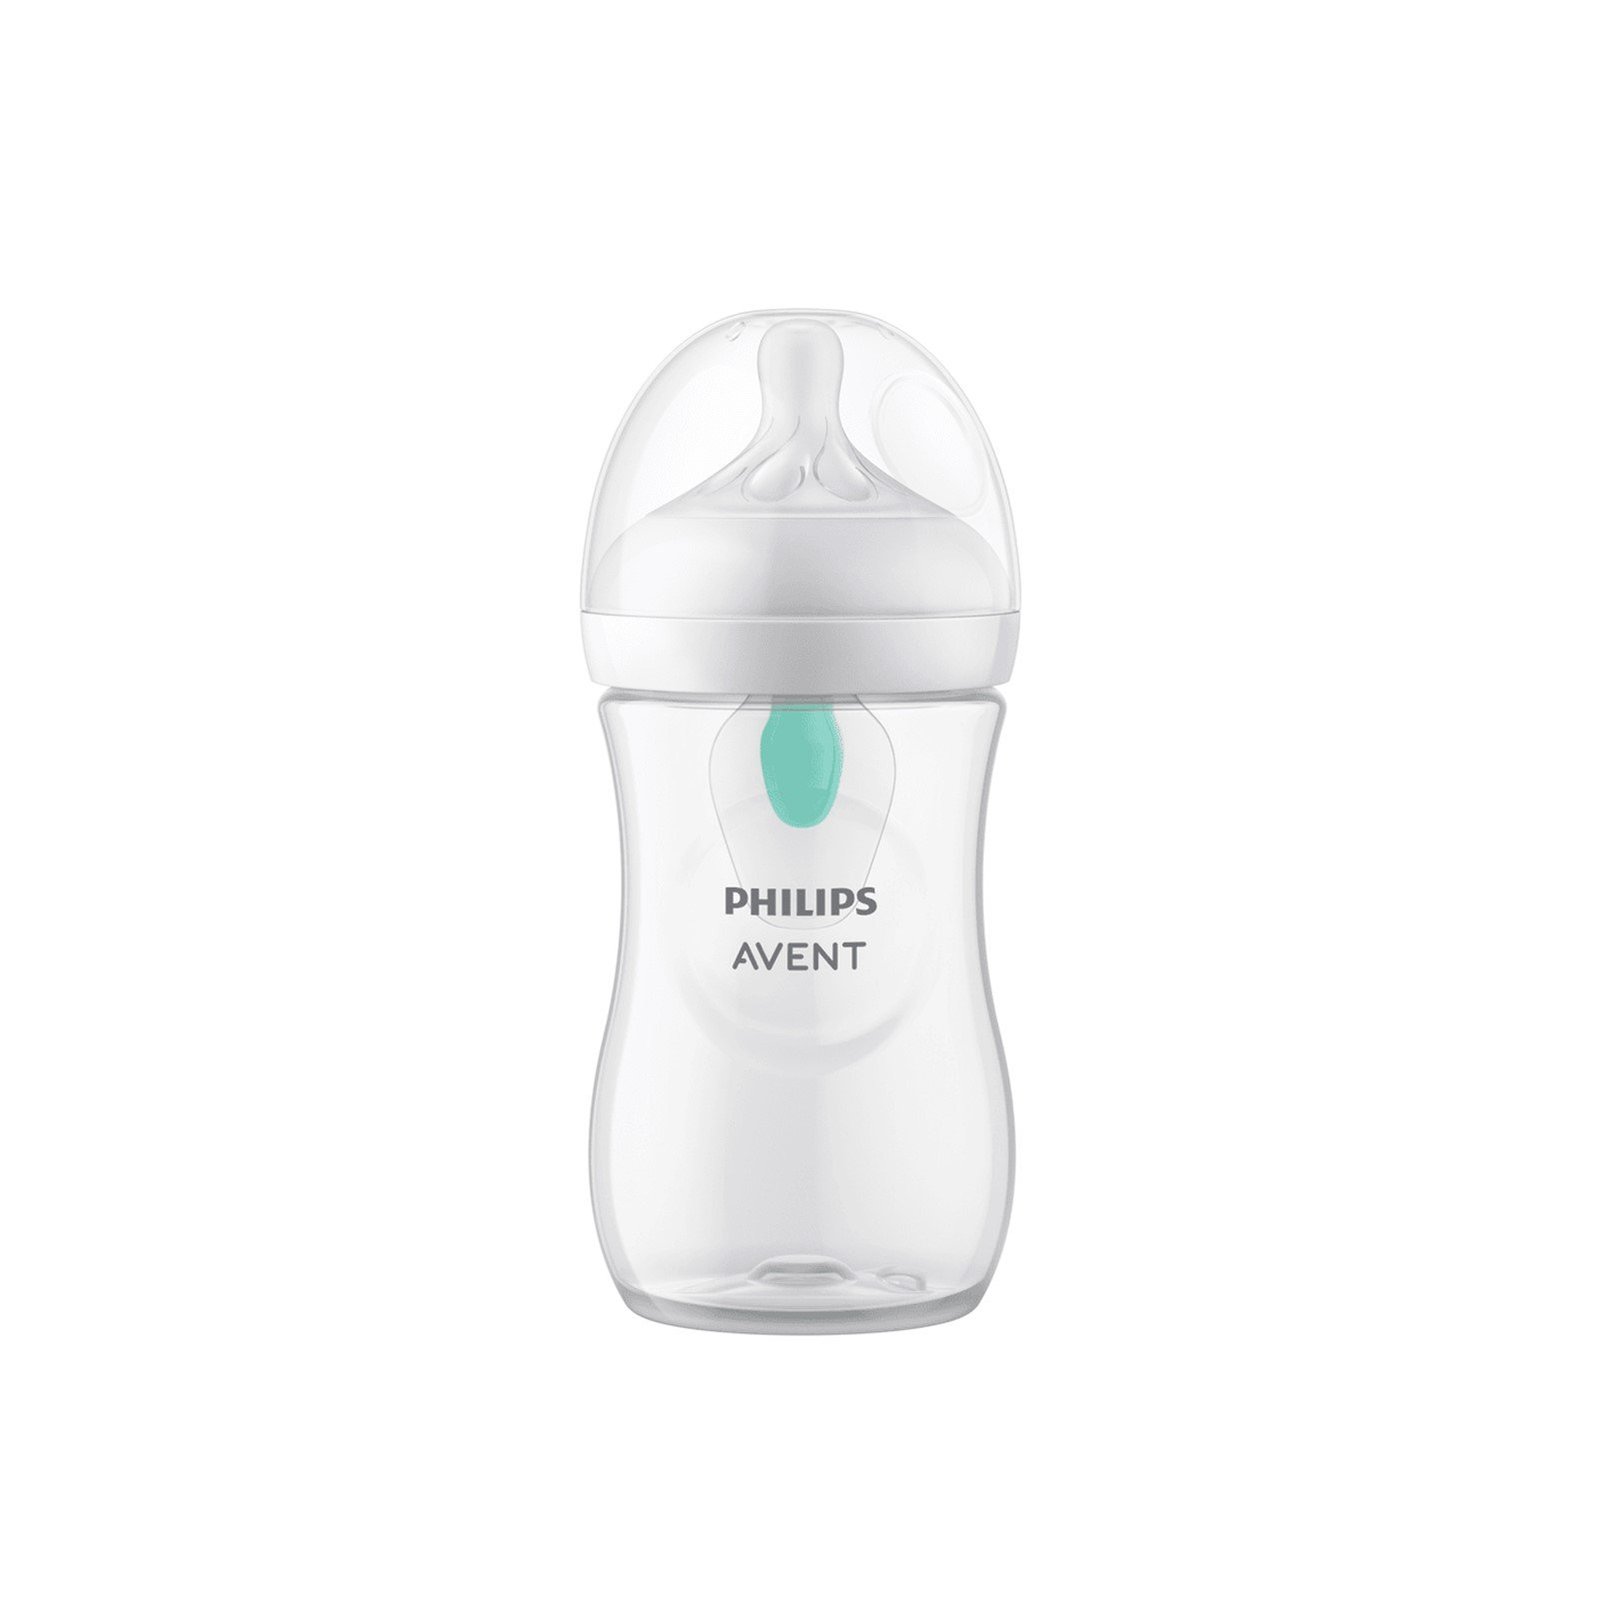 https://static.beautytocare.com/cdn-cgi/image/width=1600,height=1600,f=auto/media/catalog/product//p/h/philips-avent-natural-response-airfree-vent-baby-bottle-1m-260ml_1.jpg